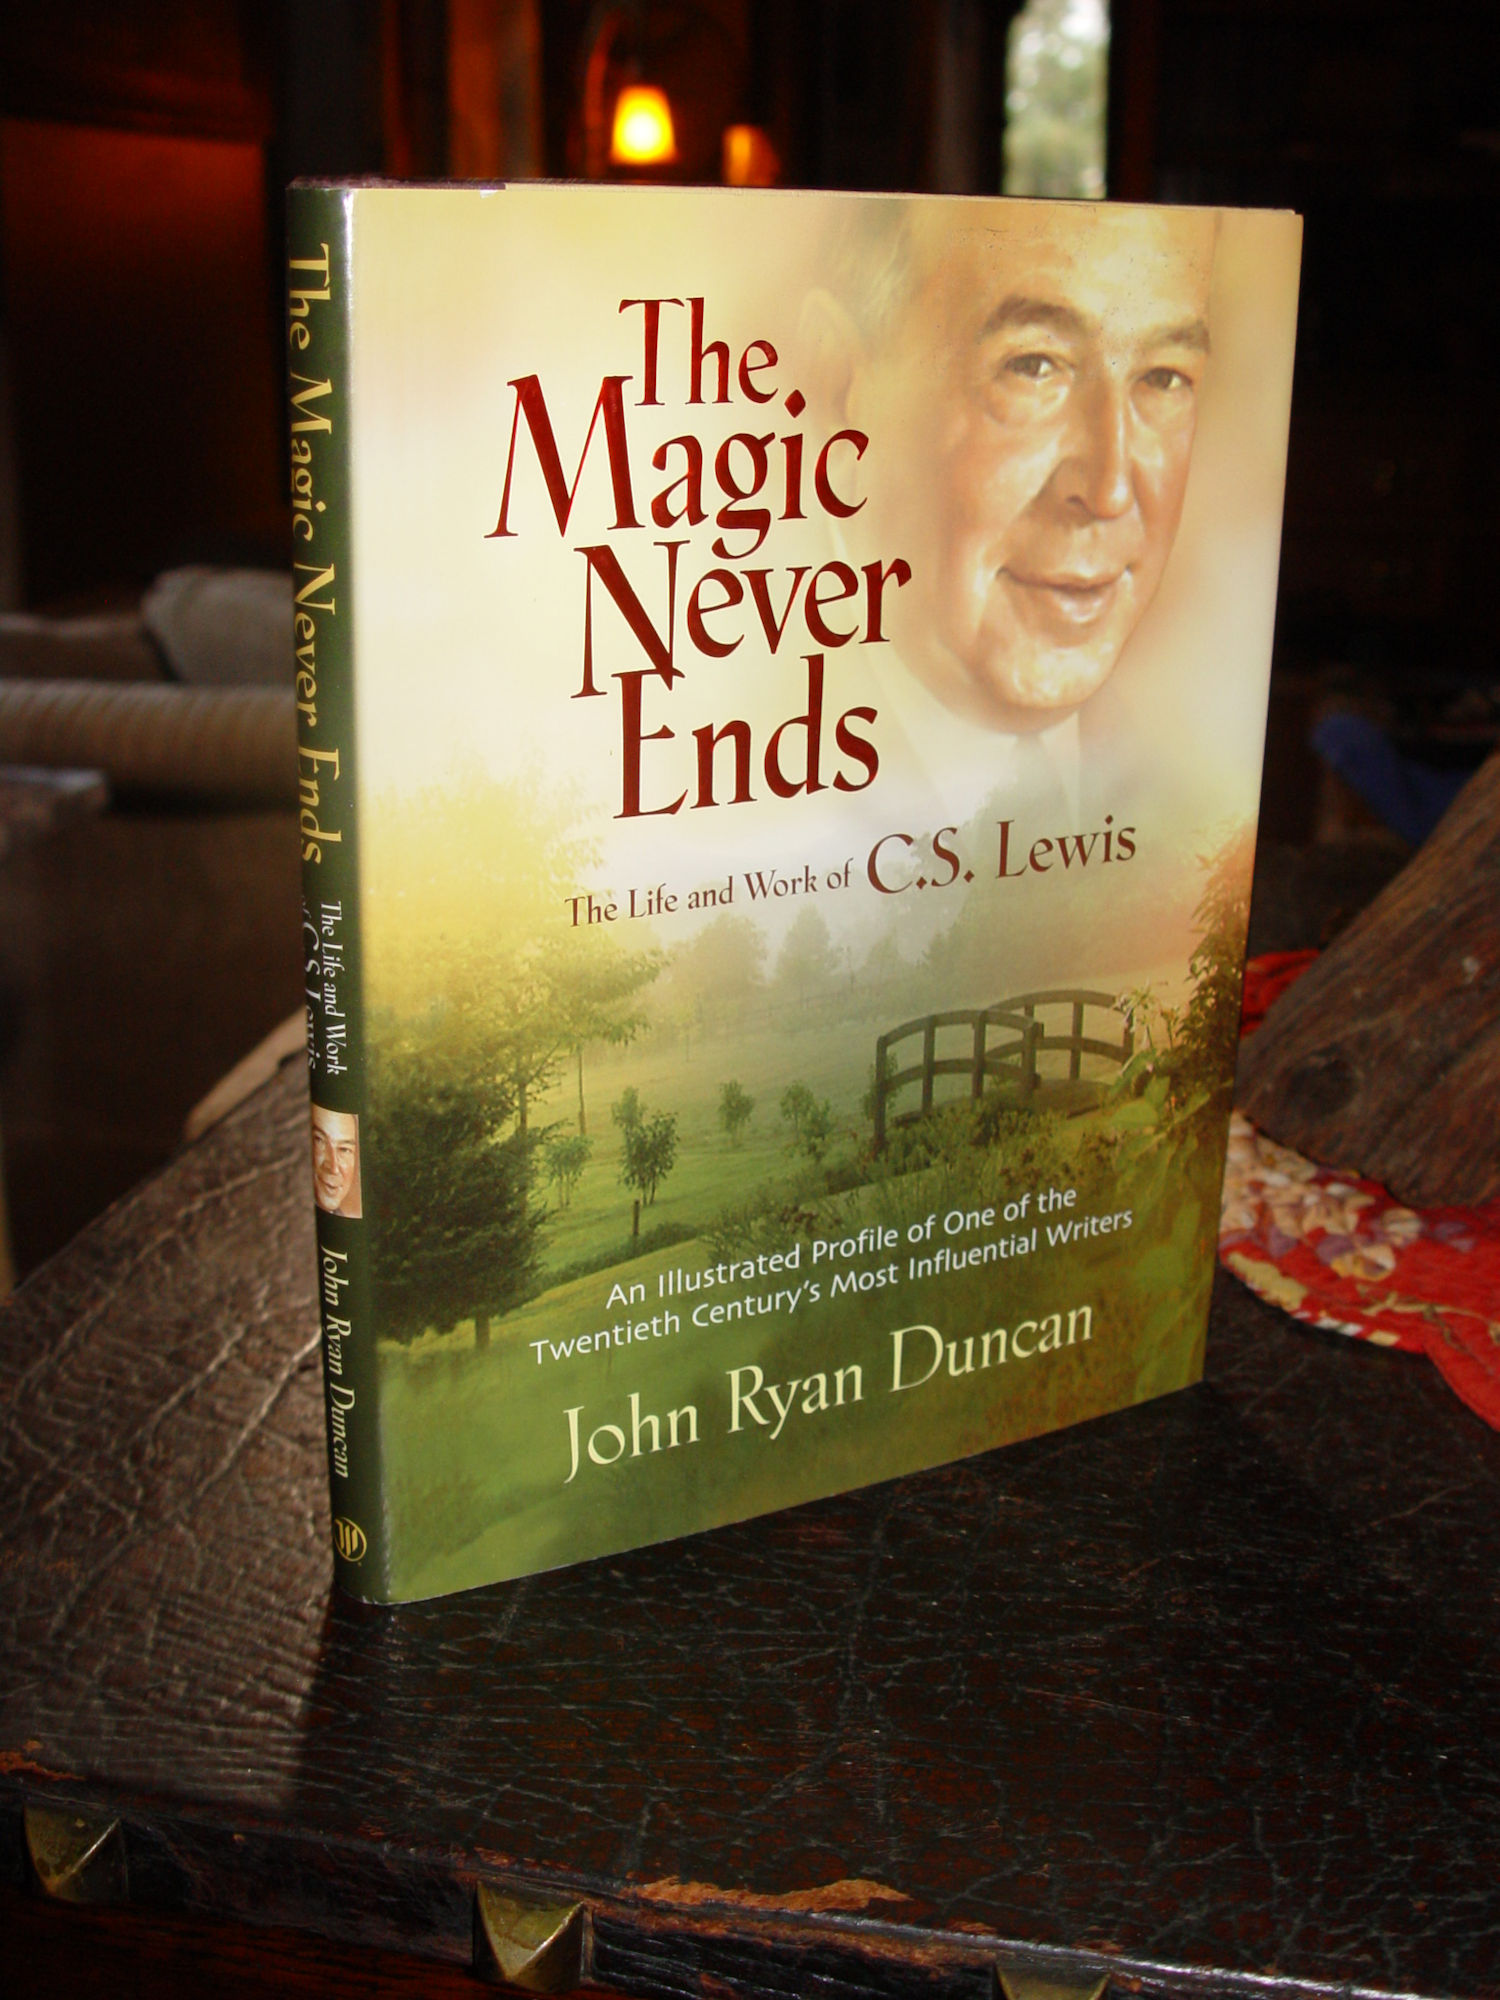 The Magic Never
                        Ends - The Life and Work of C.S. Lewis 2001 by
                        John Ryan Duncan